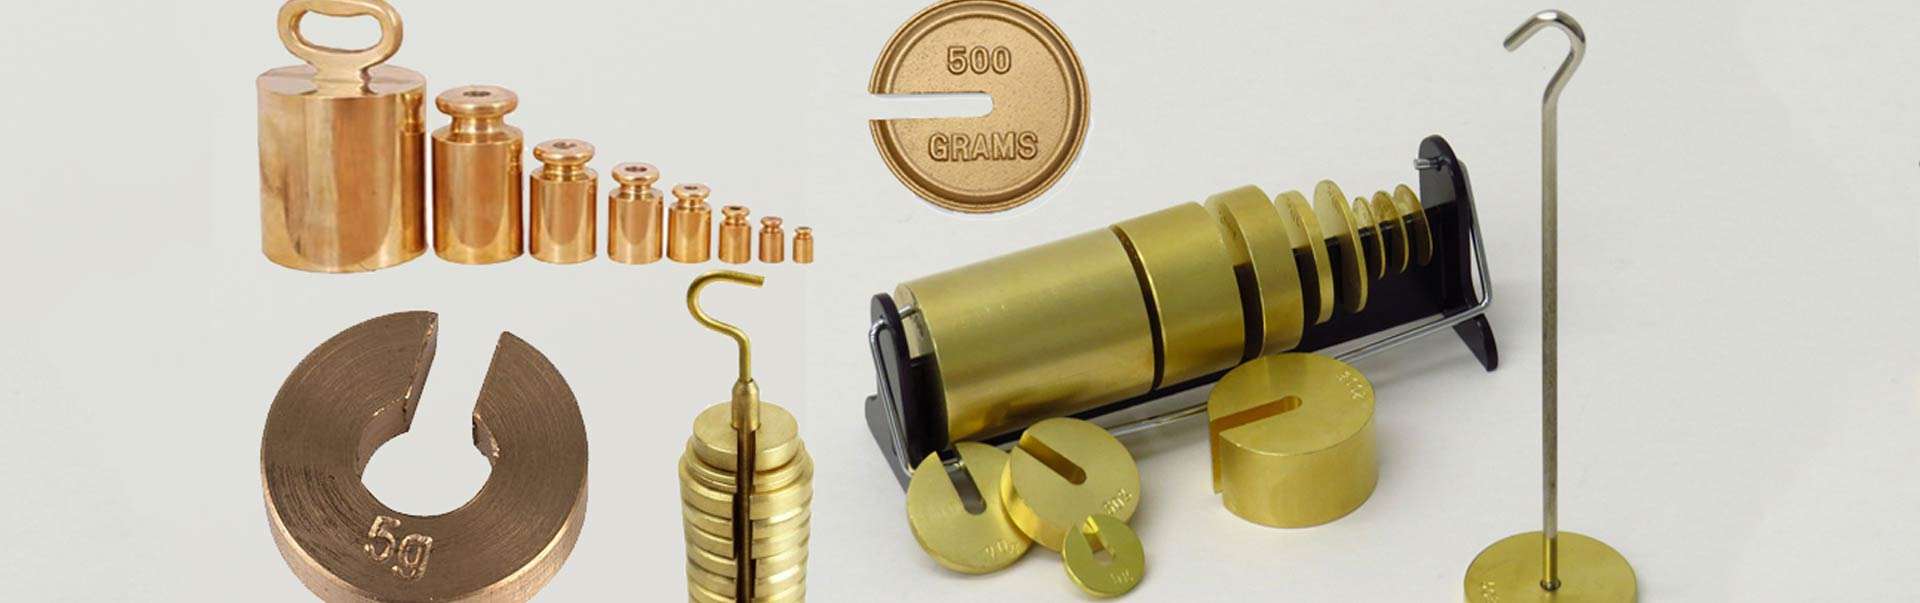 Test Weights Manufacturers in kerala